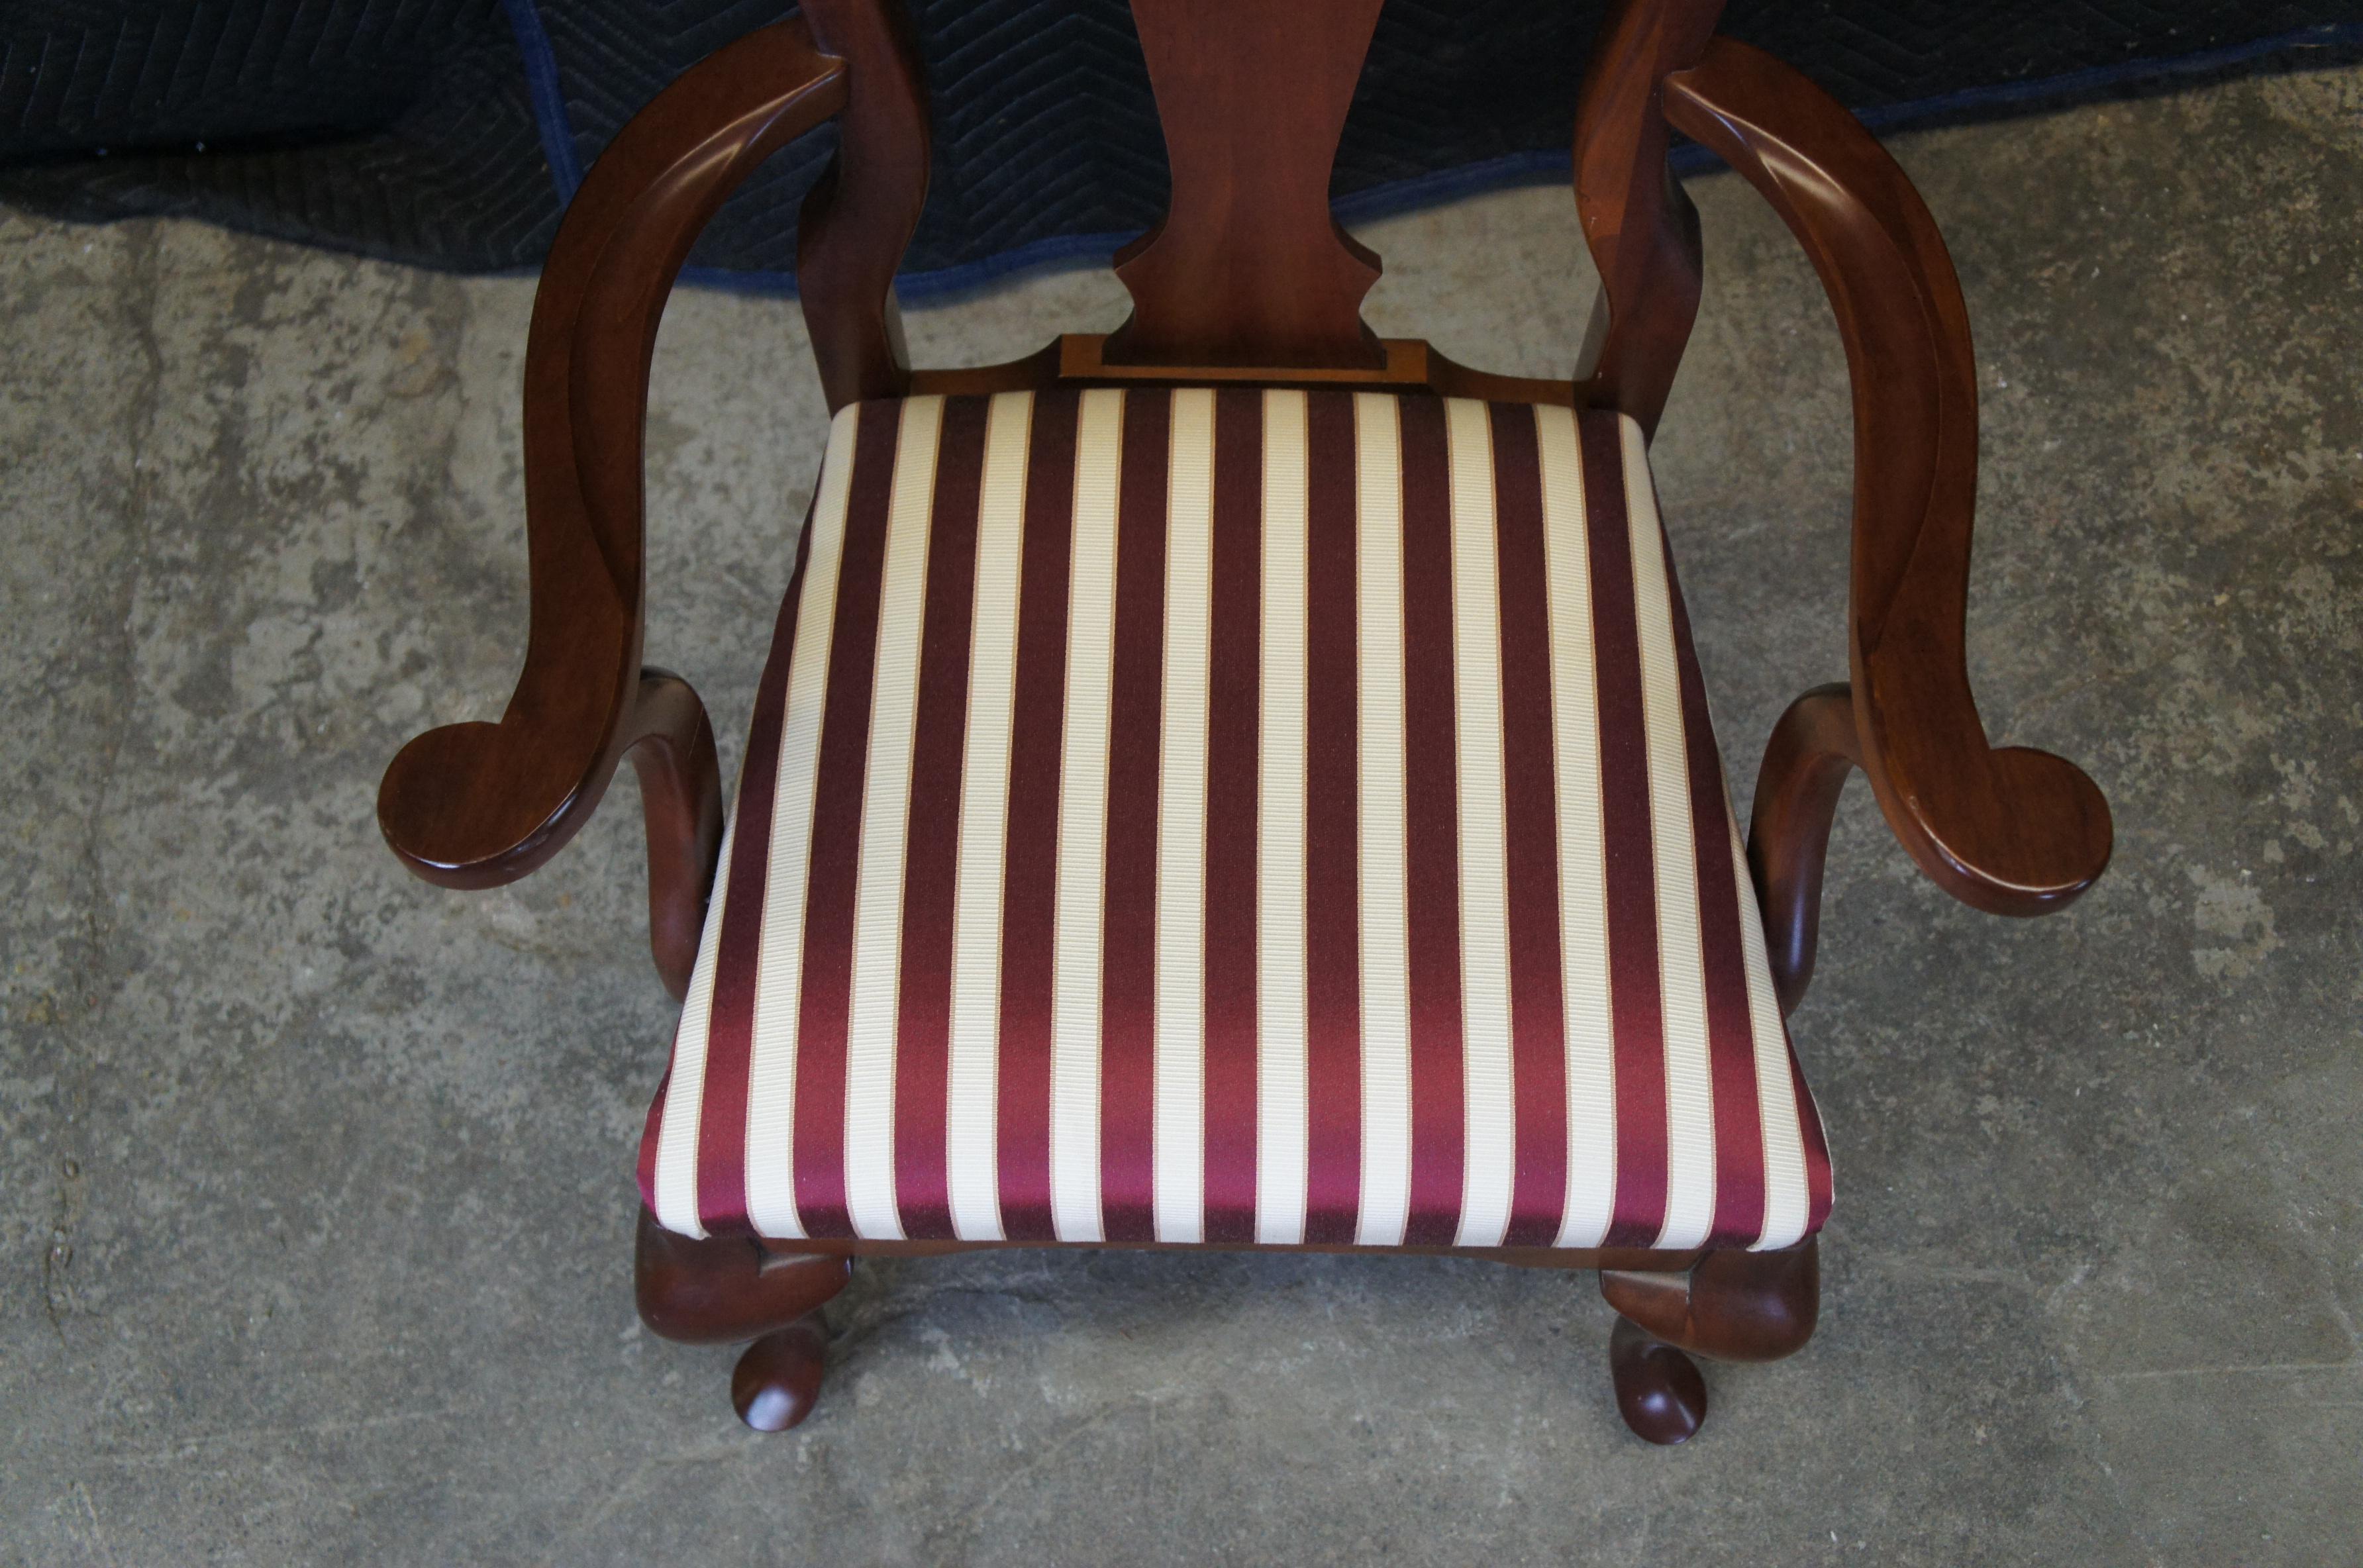 6 Vintage Cresent Queen Anne Style Cherry Dining Chairs Striped Upholstered Seat 1